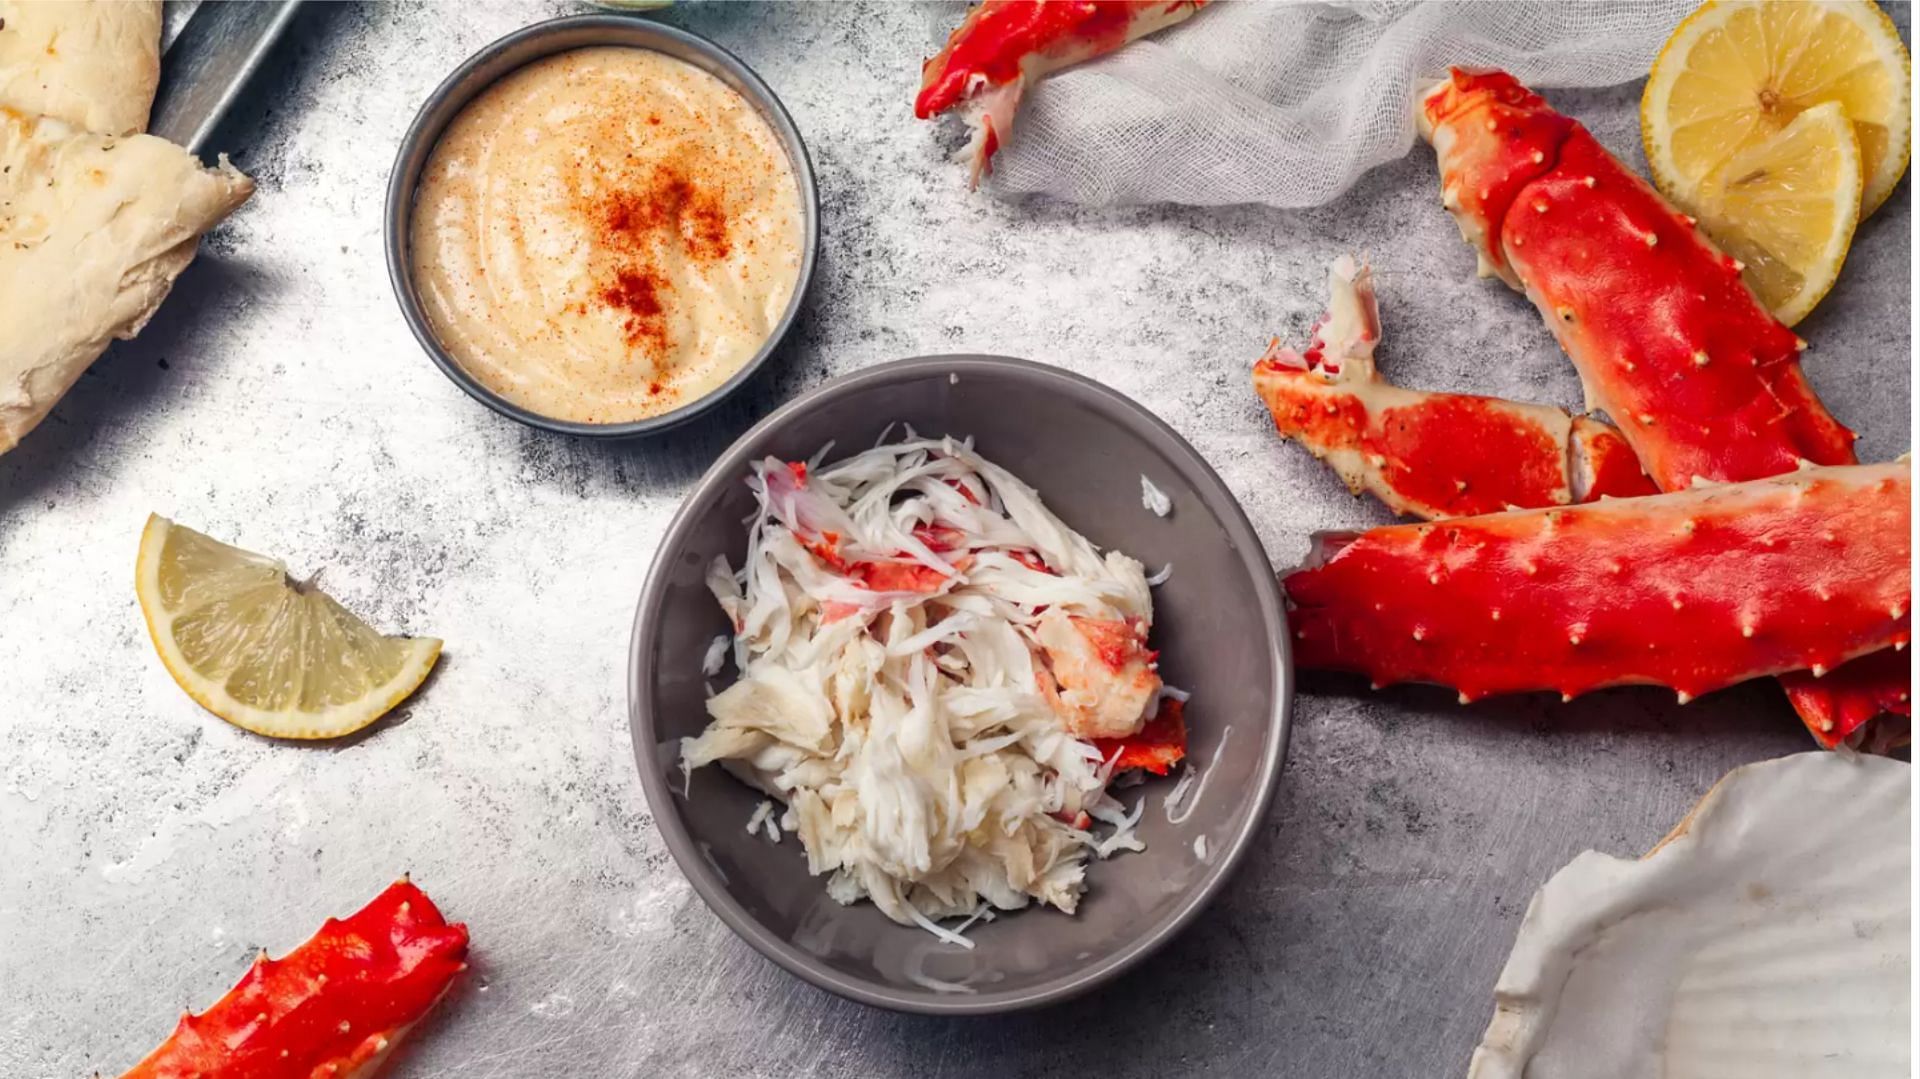 Irvington Seafood recalls its crab meat from four states amid fears of contamination by Listeria monocytogenes (Image via Asya Nurullina/Shutterstock)